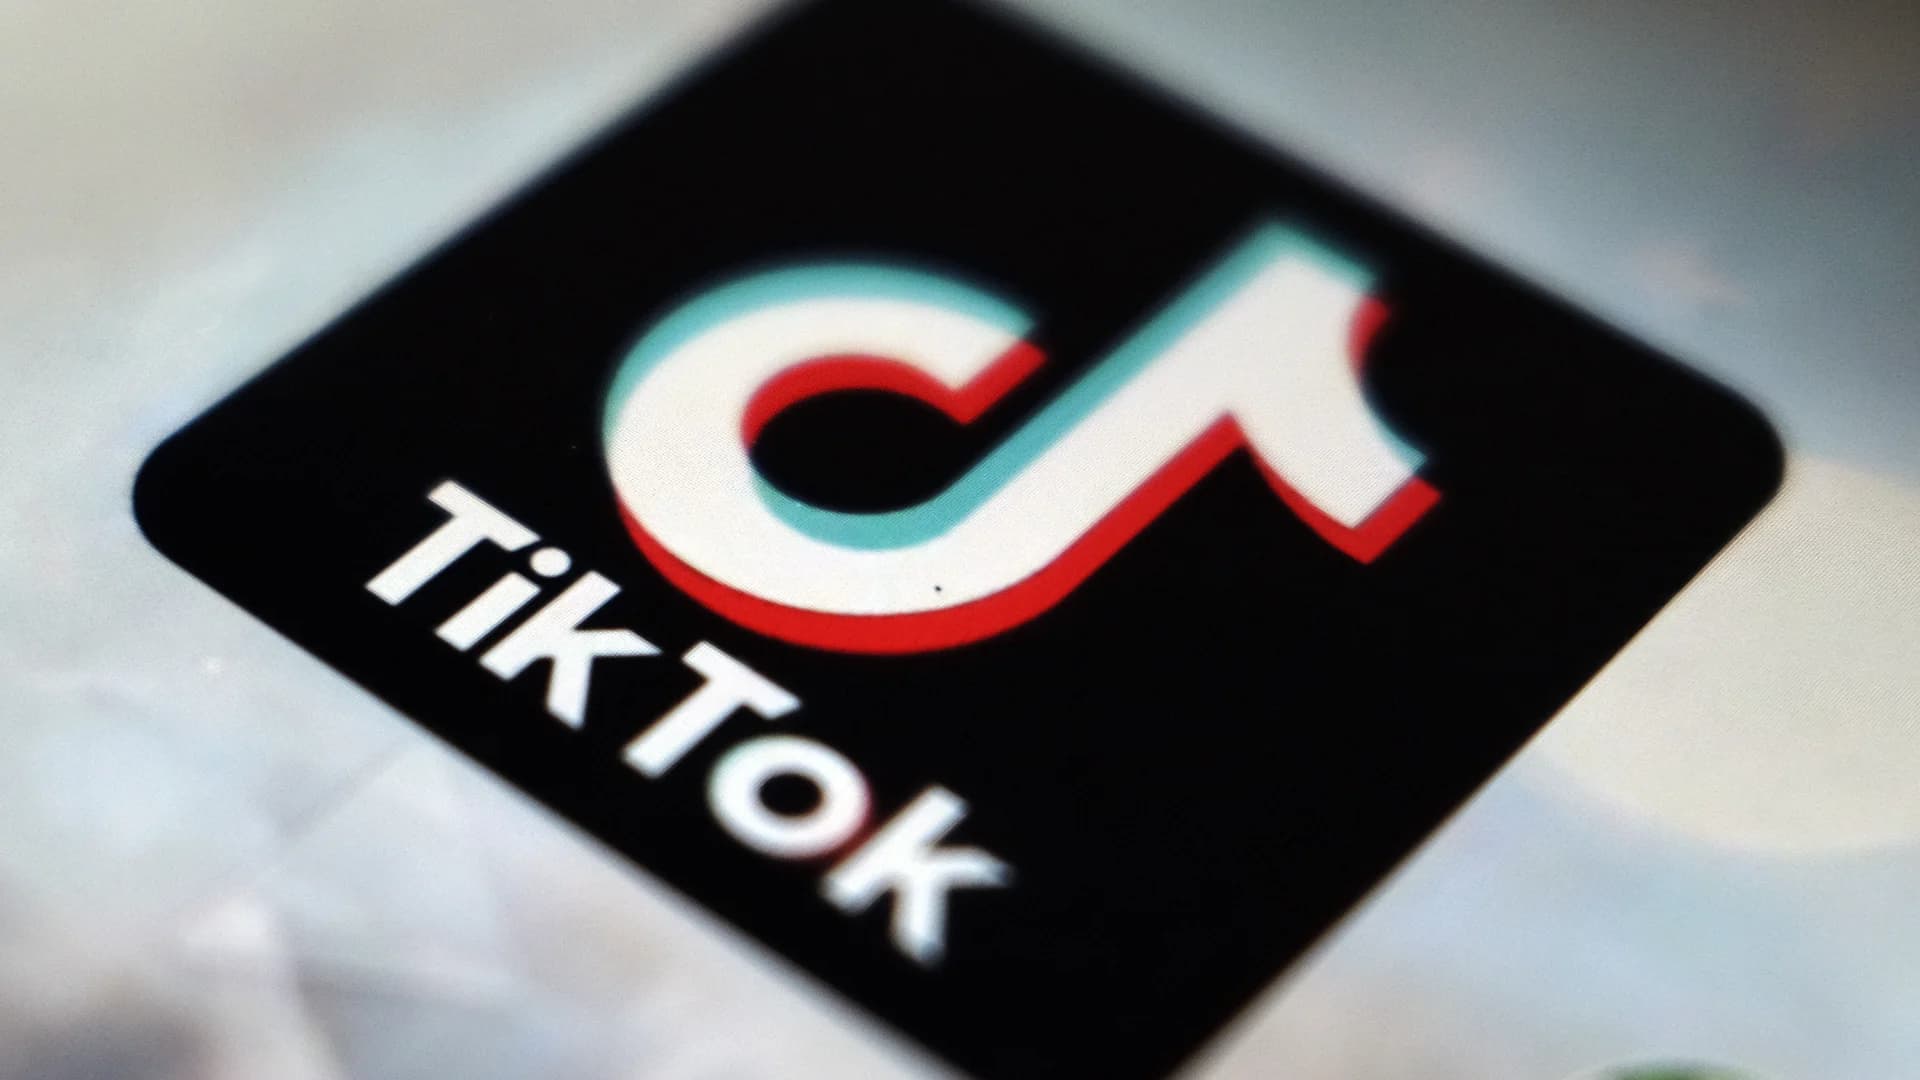 US drops Trump order targeting TikTok, WeChat; plans its own review